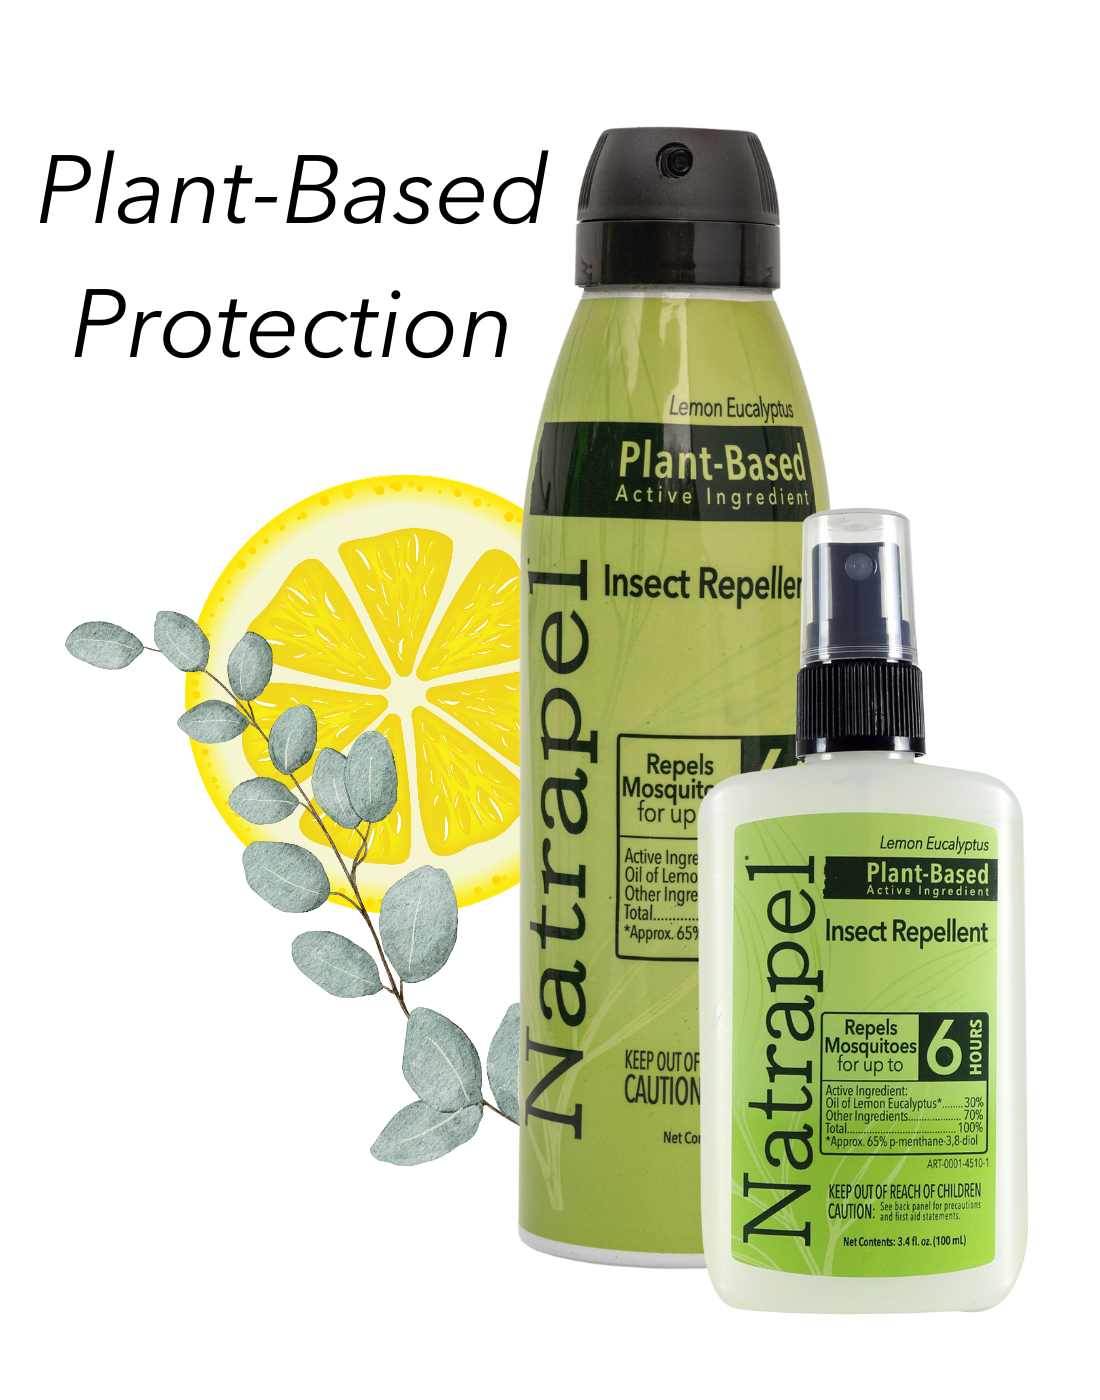 Plant Based Protection, Natrapel Lemon Eucalyptus Insect Repellents pictured over lemon and eucalyptus